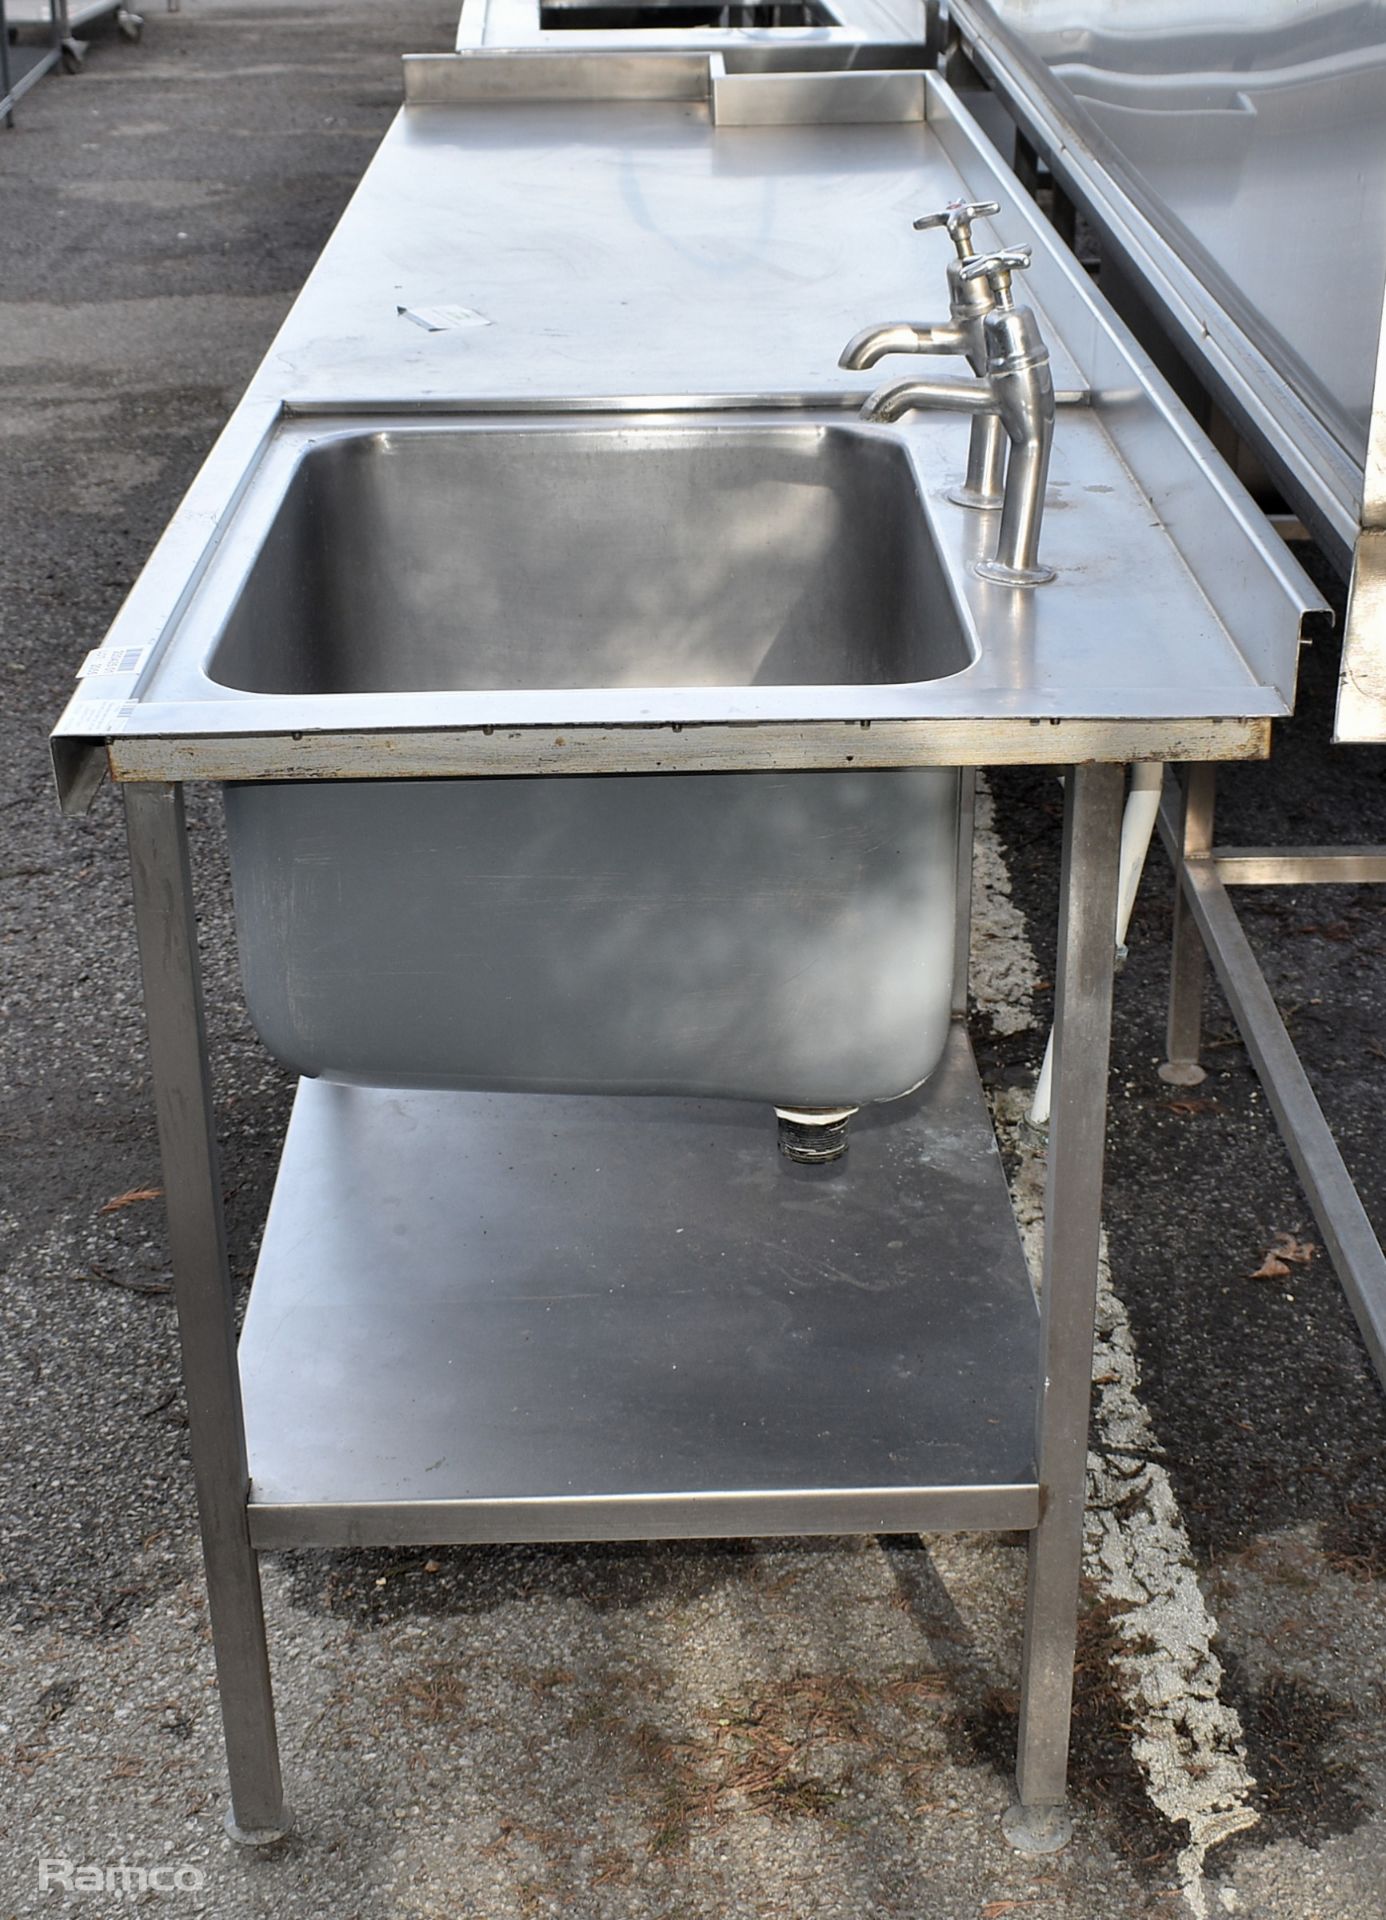 Stainless steel single sink bowl and counter top unit with bottom shelf - L 240 x W 70 x H 110cm - Bild 5 aus 6